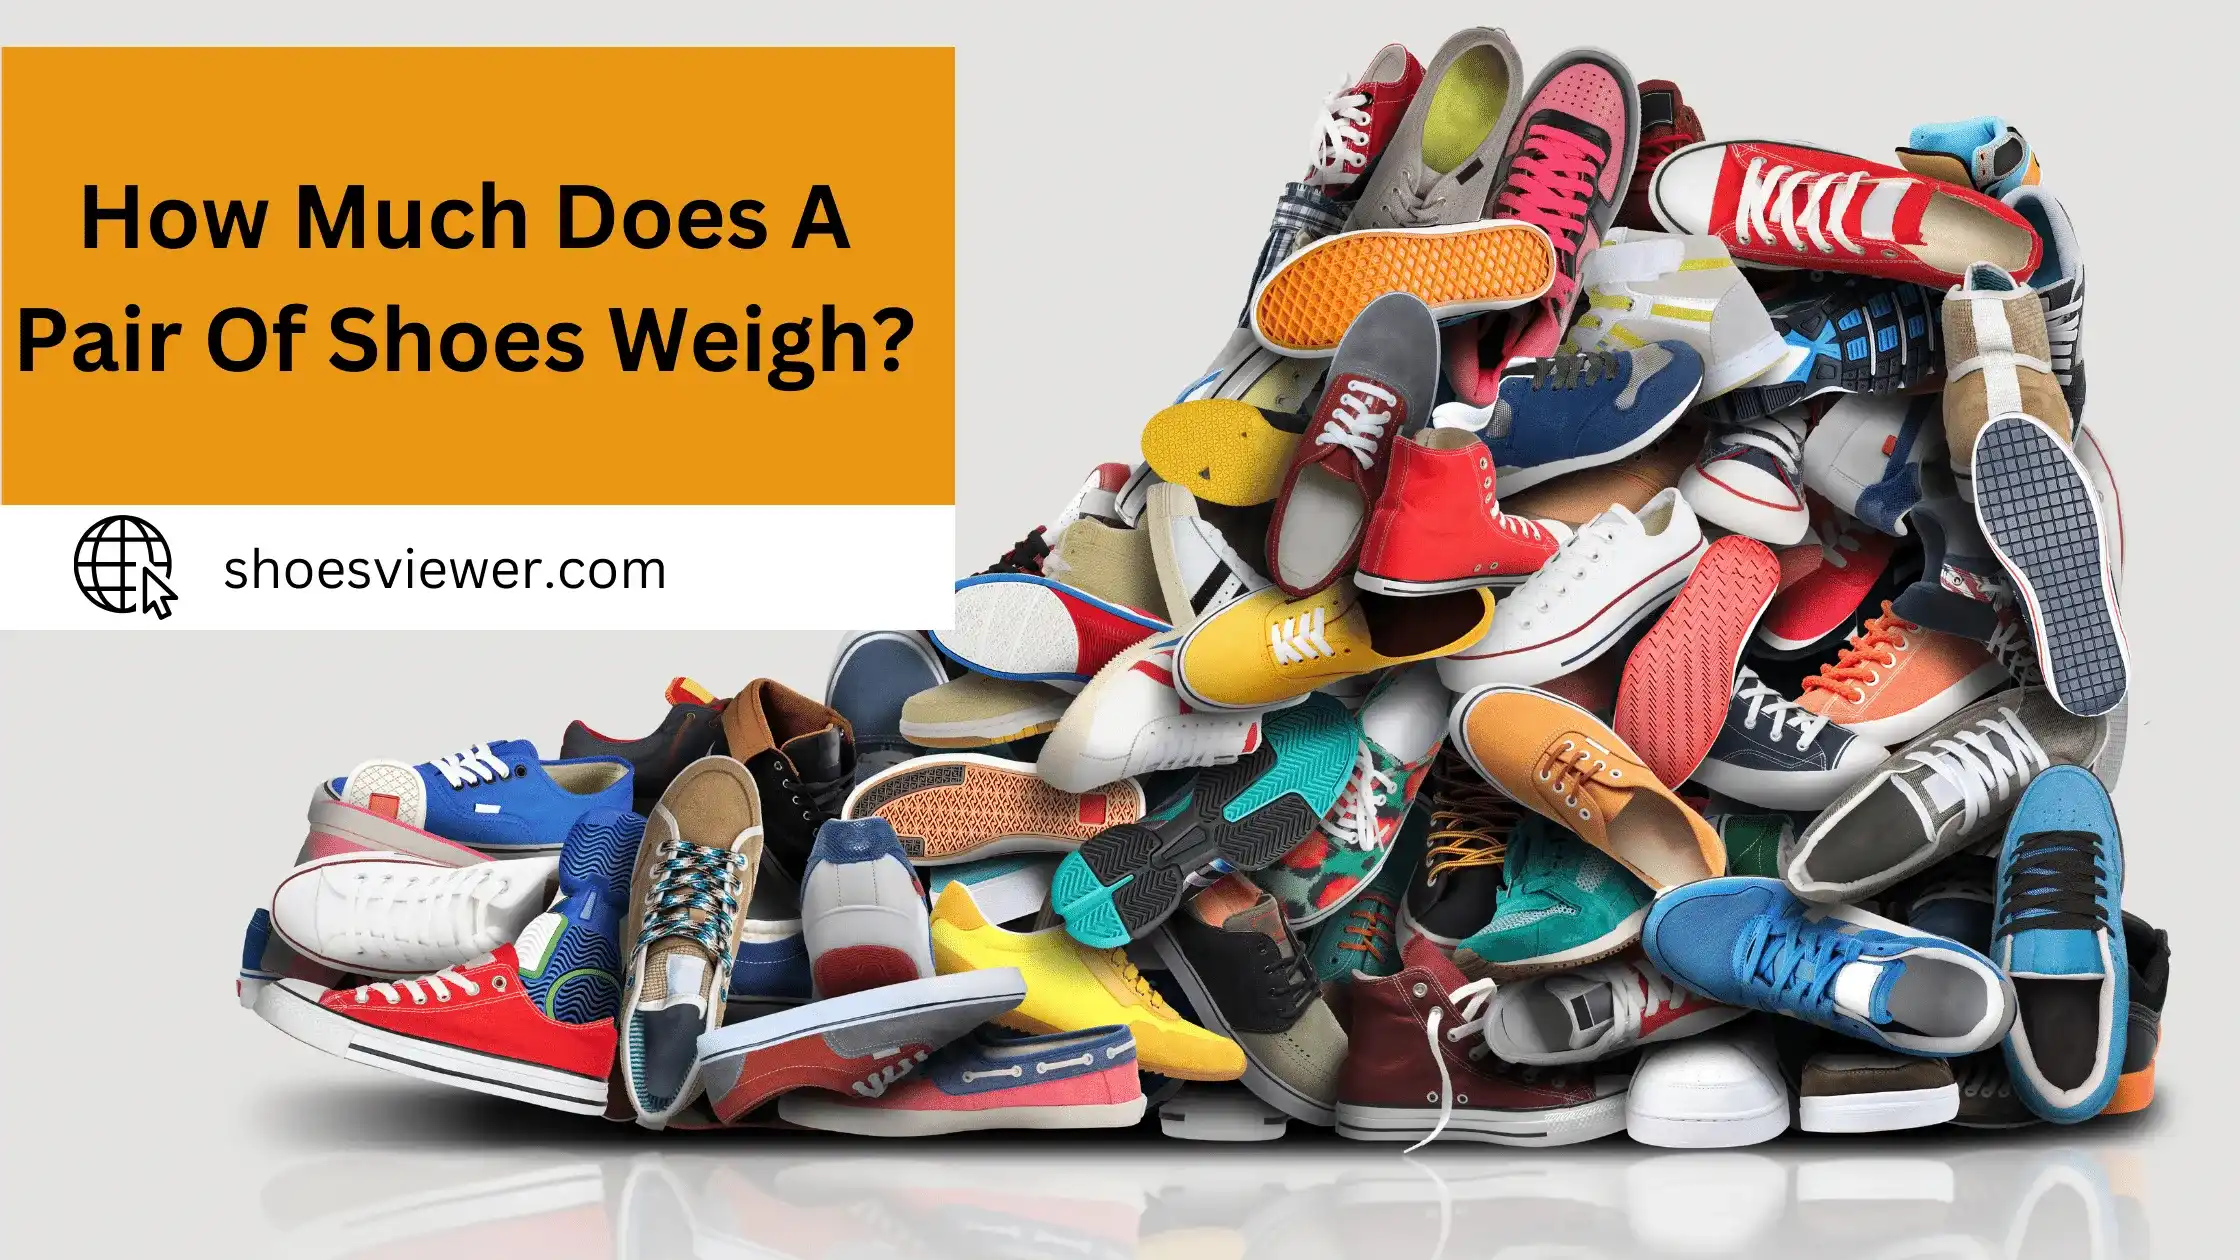 How Much Does A Pair Of Shoes Weigh? Expert Tips And Advice